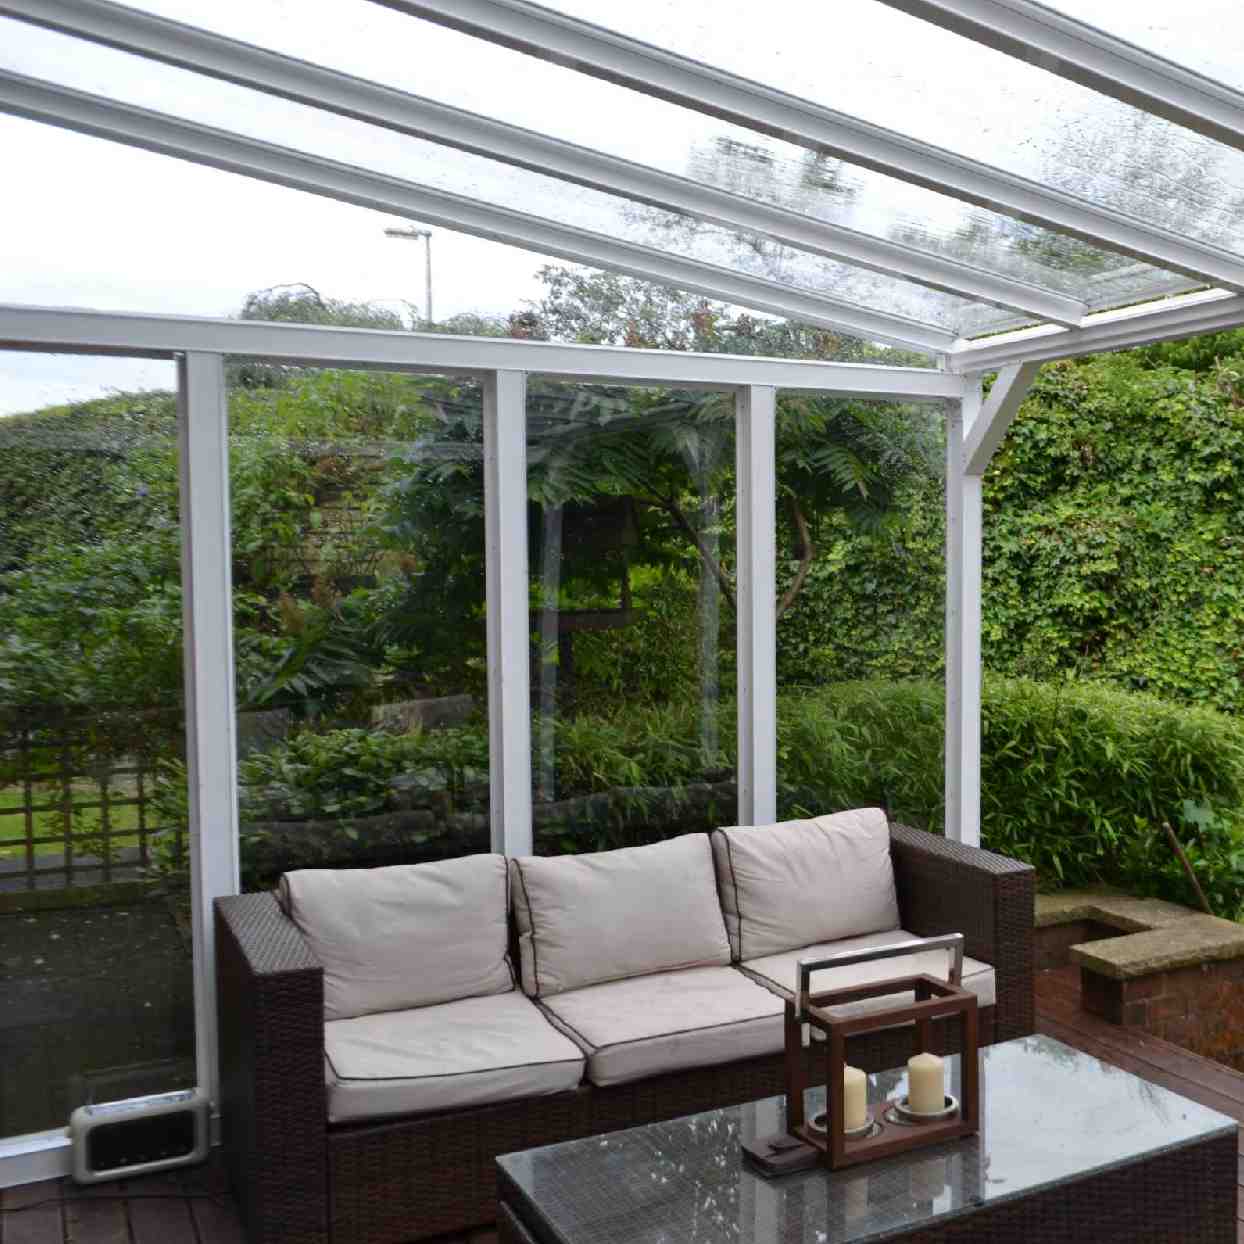 Buy Omega Verandah White with 6mm Glass Clear Plate Polycarbonate Glazing - 6.3m (W) x 4.0m (P), (4) Supporting Posts online today